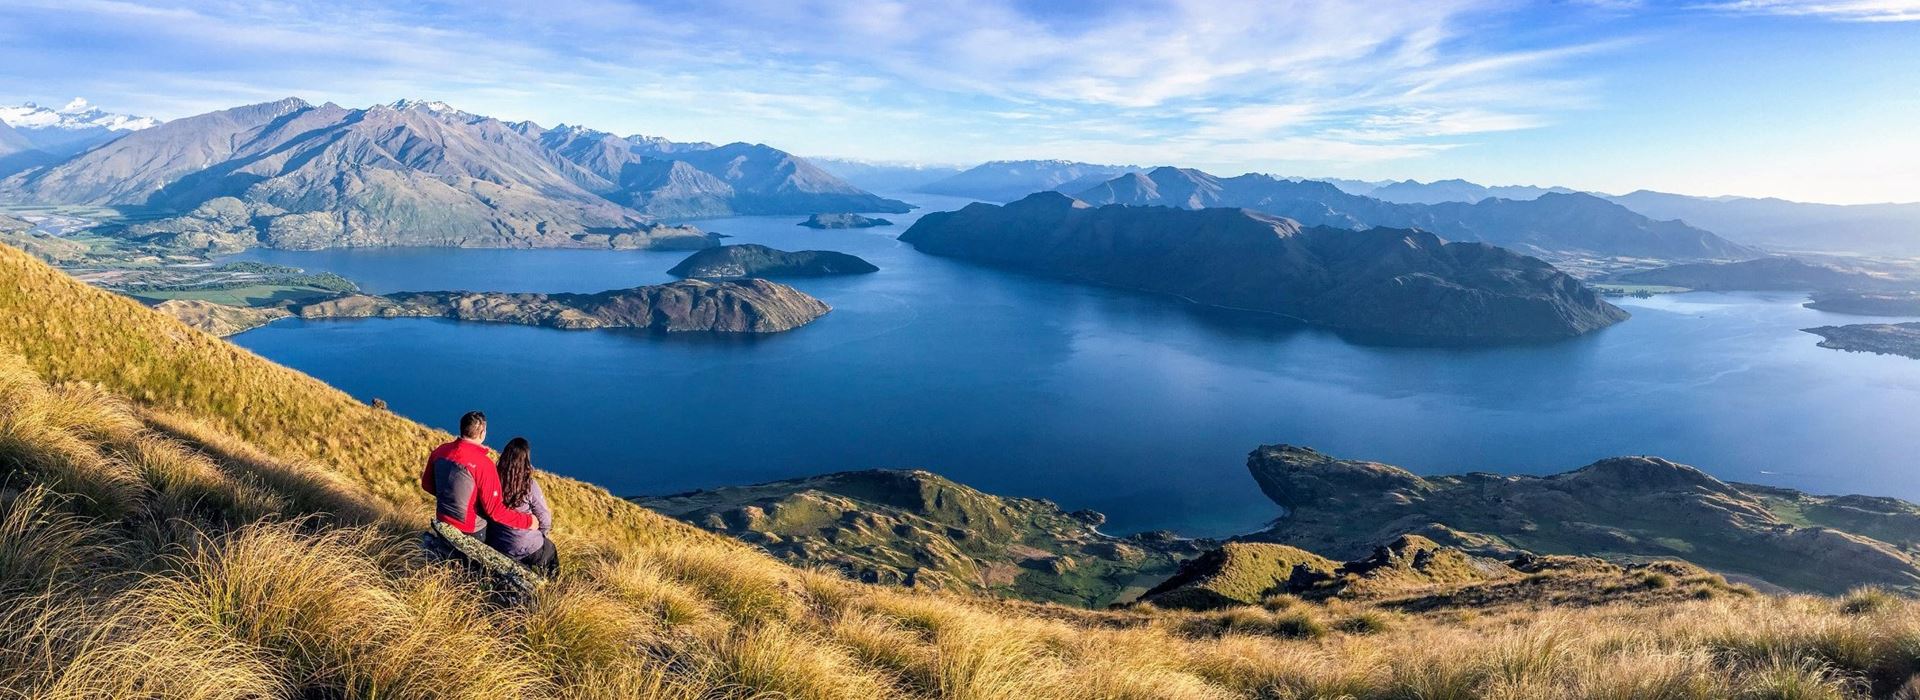 15 Day - Discover New Zealand Tour